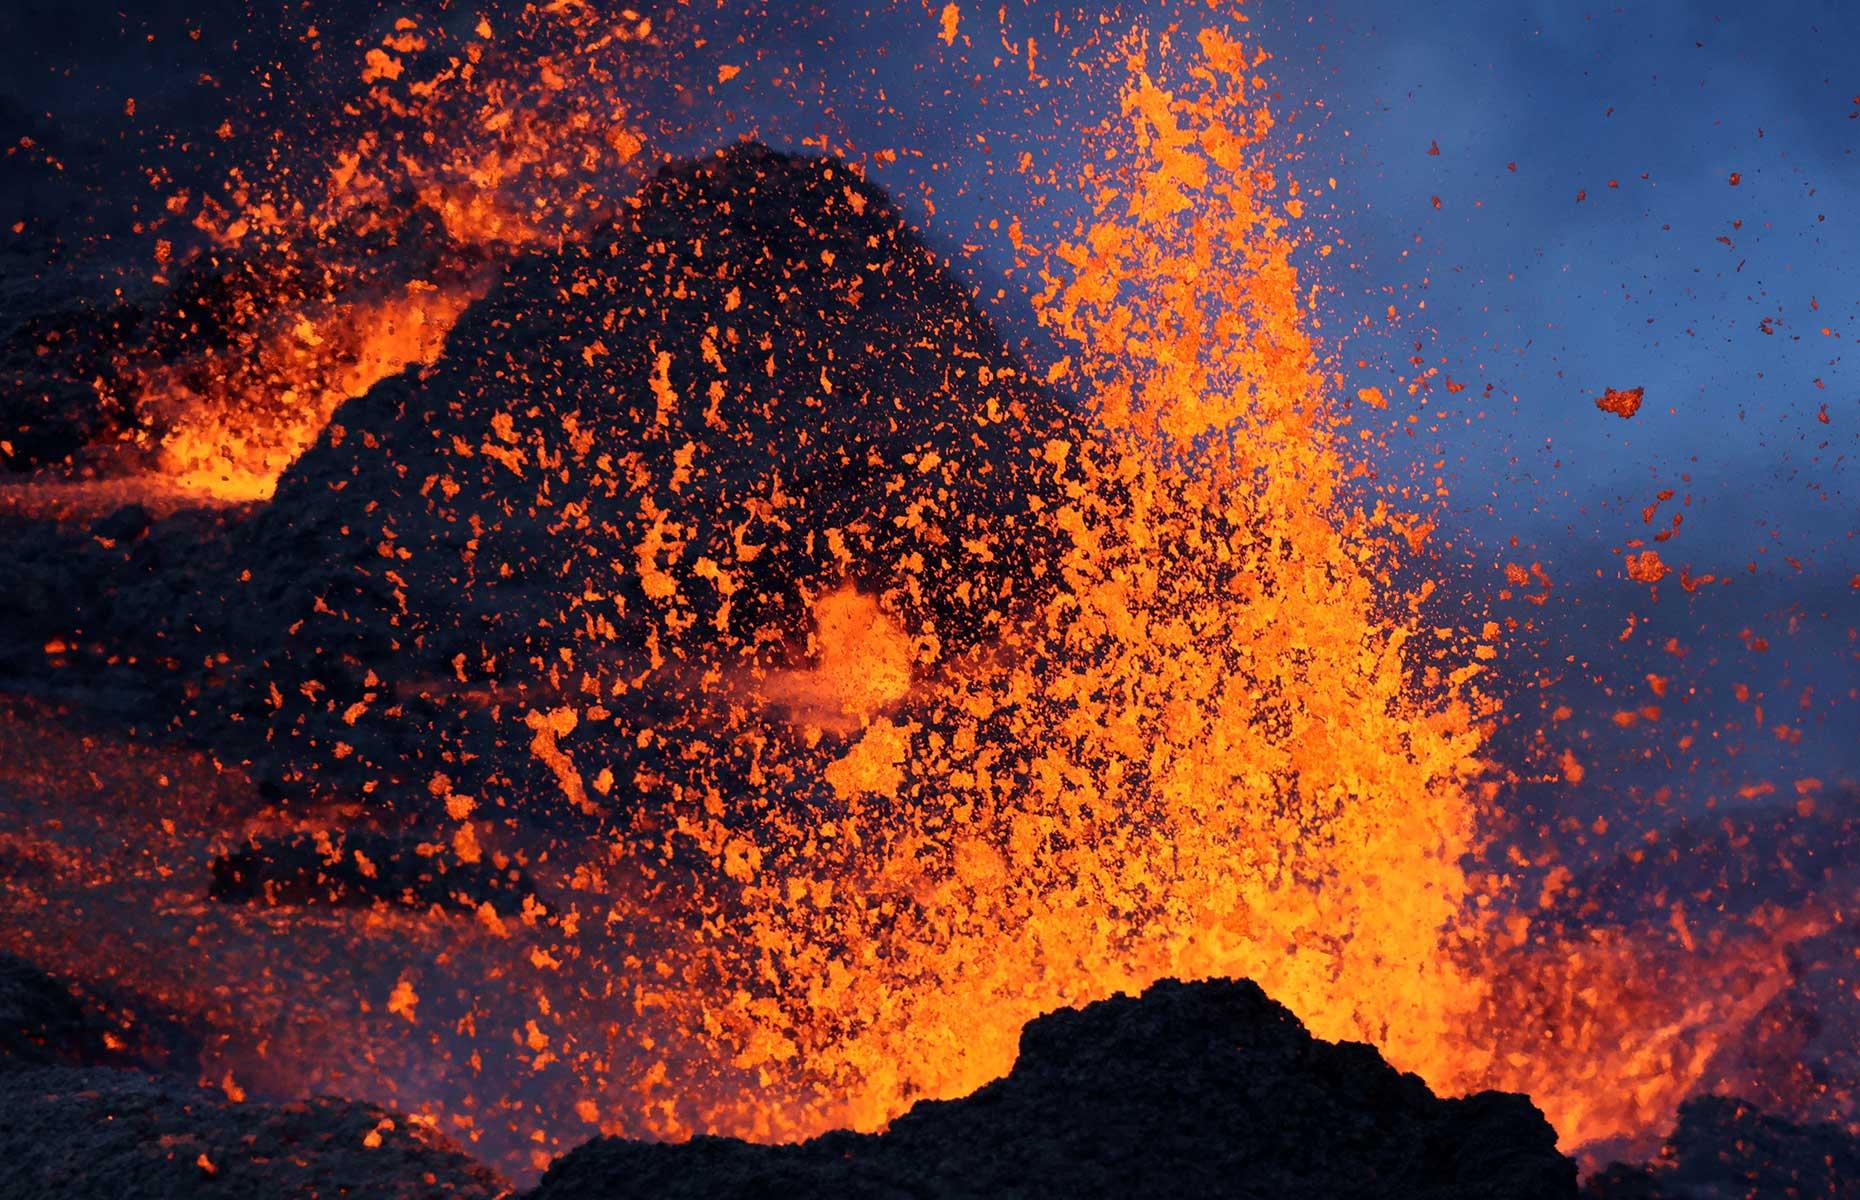 Located around 140 miles (226km) from Mauritius, the island of Reunion is home to the Piton de la Fournaise volcano, which at 8,635 feet (2,632m) is the highest in the Indian Ocean. Reunion’s most visited attraction, it’s one of the world’s most accessible mountains for hikers taking up a third of the island. It’s also one of the world's most active volcanoes, erupting on average once every nine months.